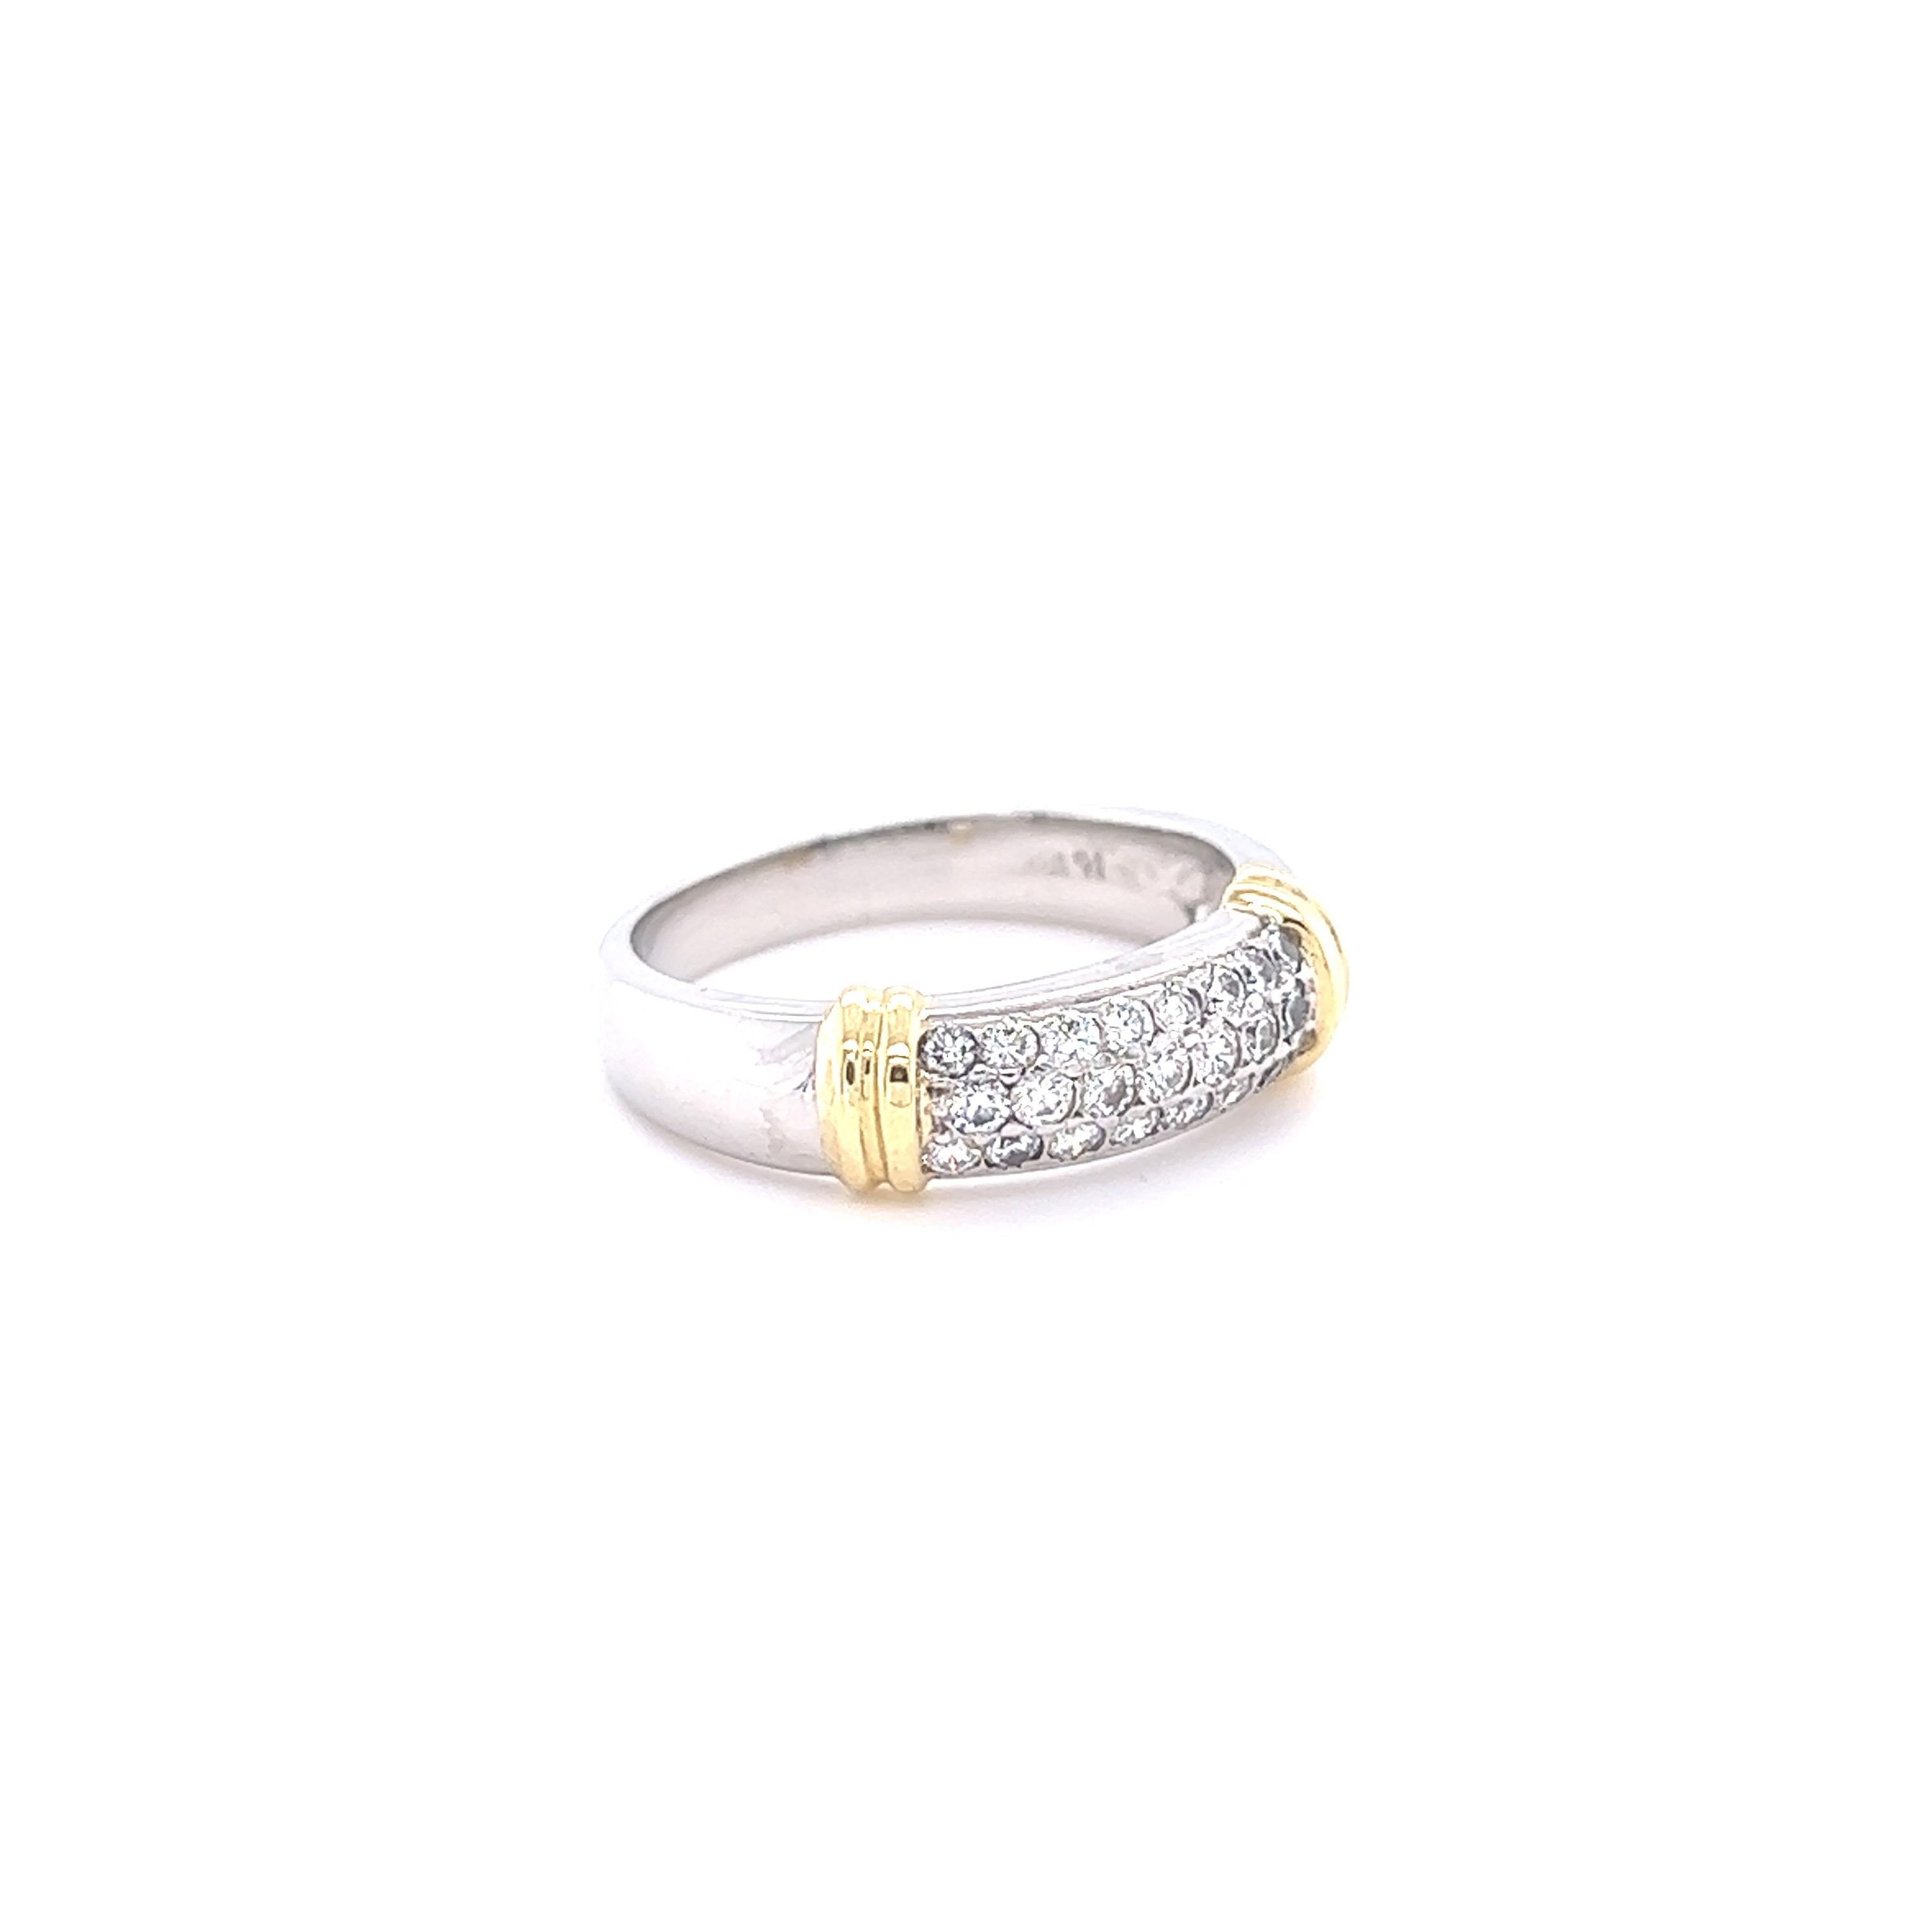 This band has 22 Round Cut Diamonds that weigh 0.60 carats. The clarity and color of the diamonds are SI-F. The band is 5.5 mm in thickness. 

The band is curated in Platinum and 18K and weighs approximately 9.1 grams. 

The ring is a size 8 1/2 and